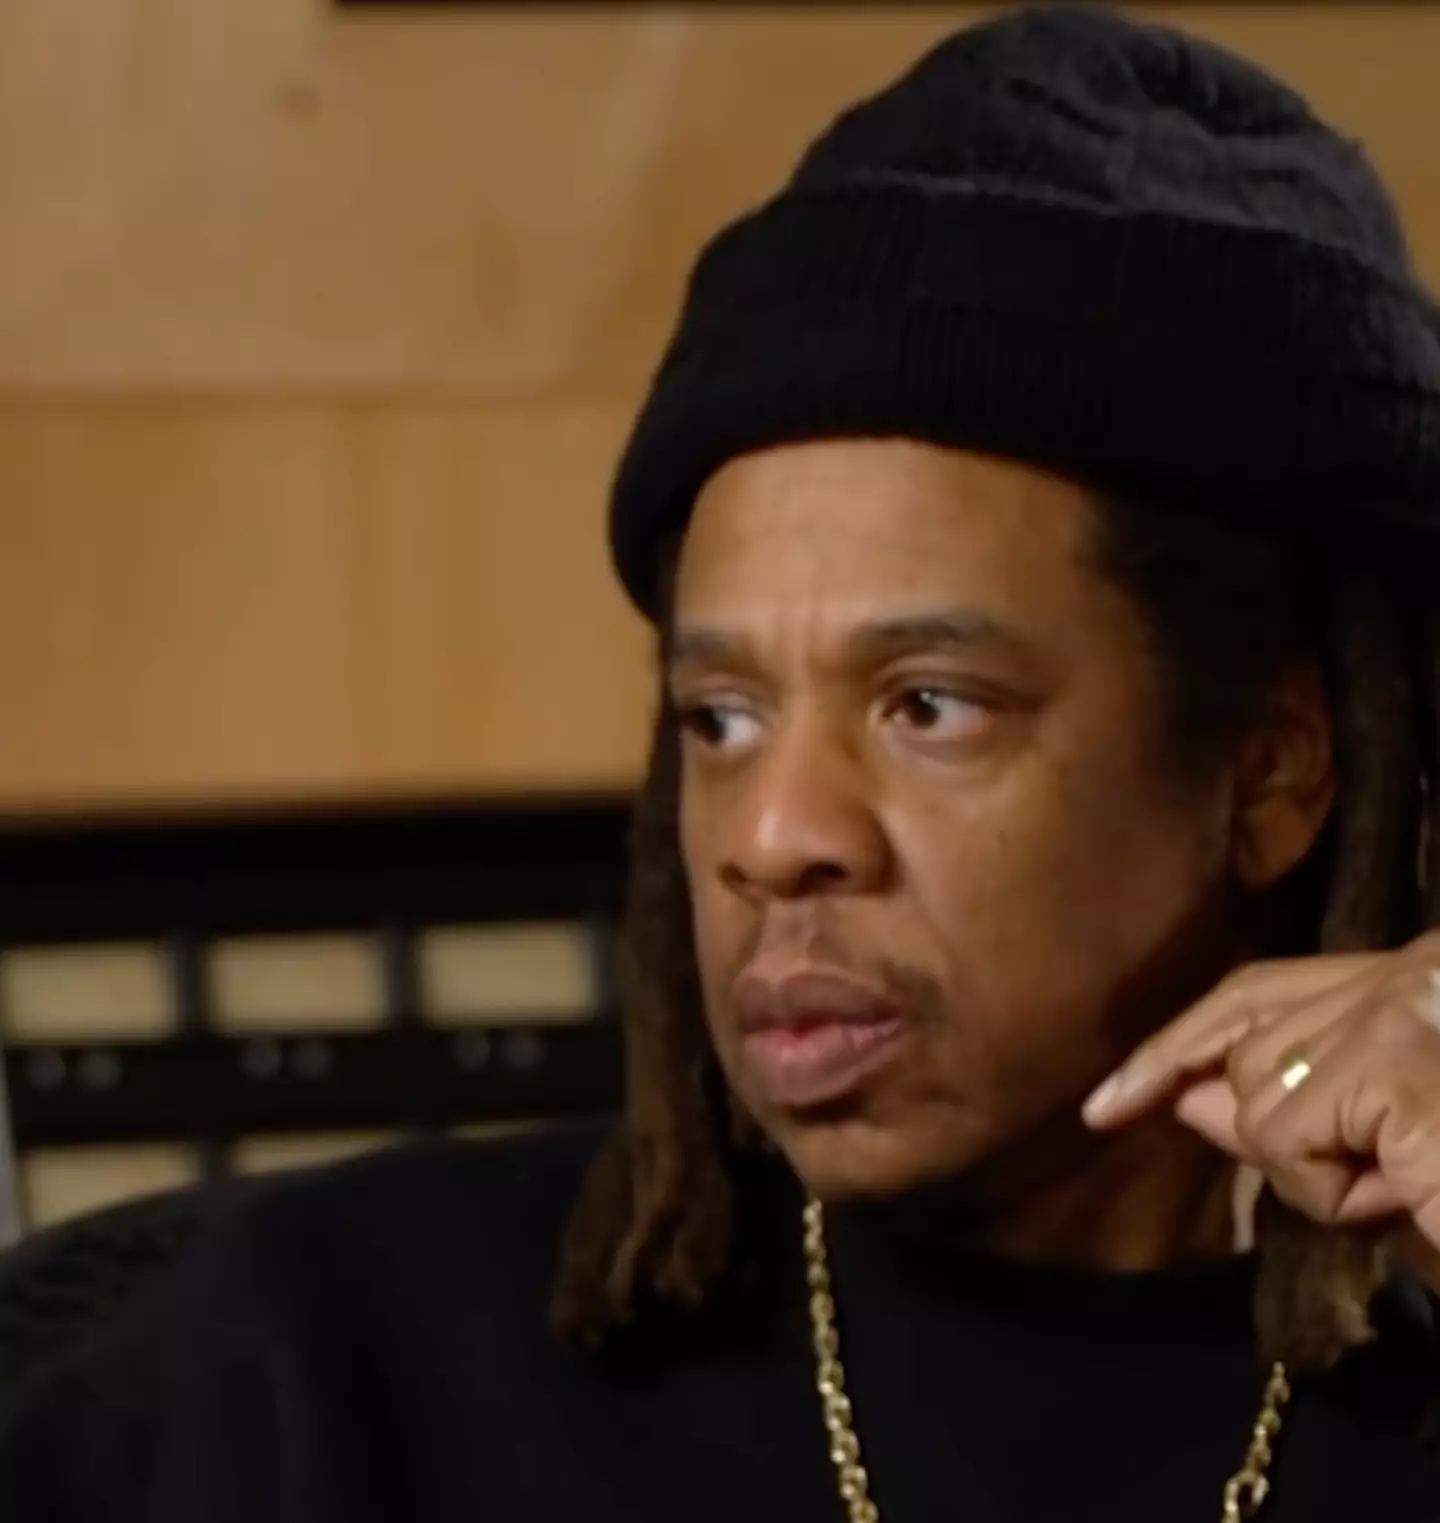 Jay-Z has revealed what it would take for him to release new music.